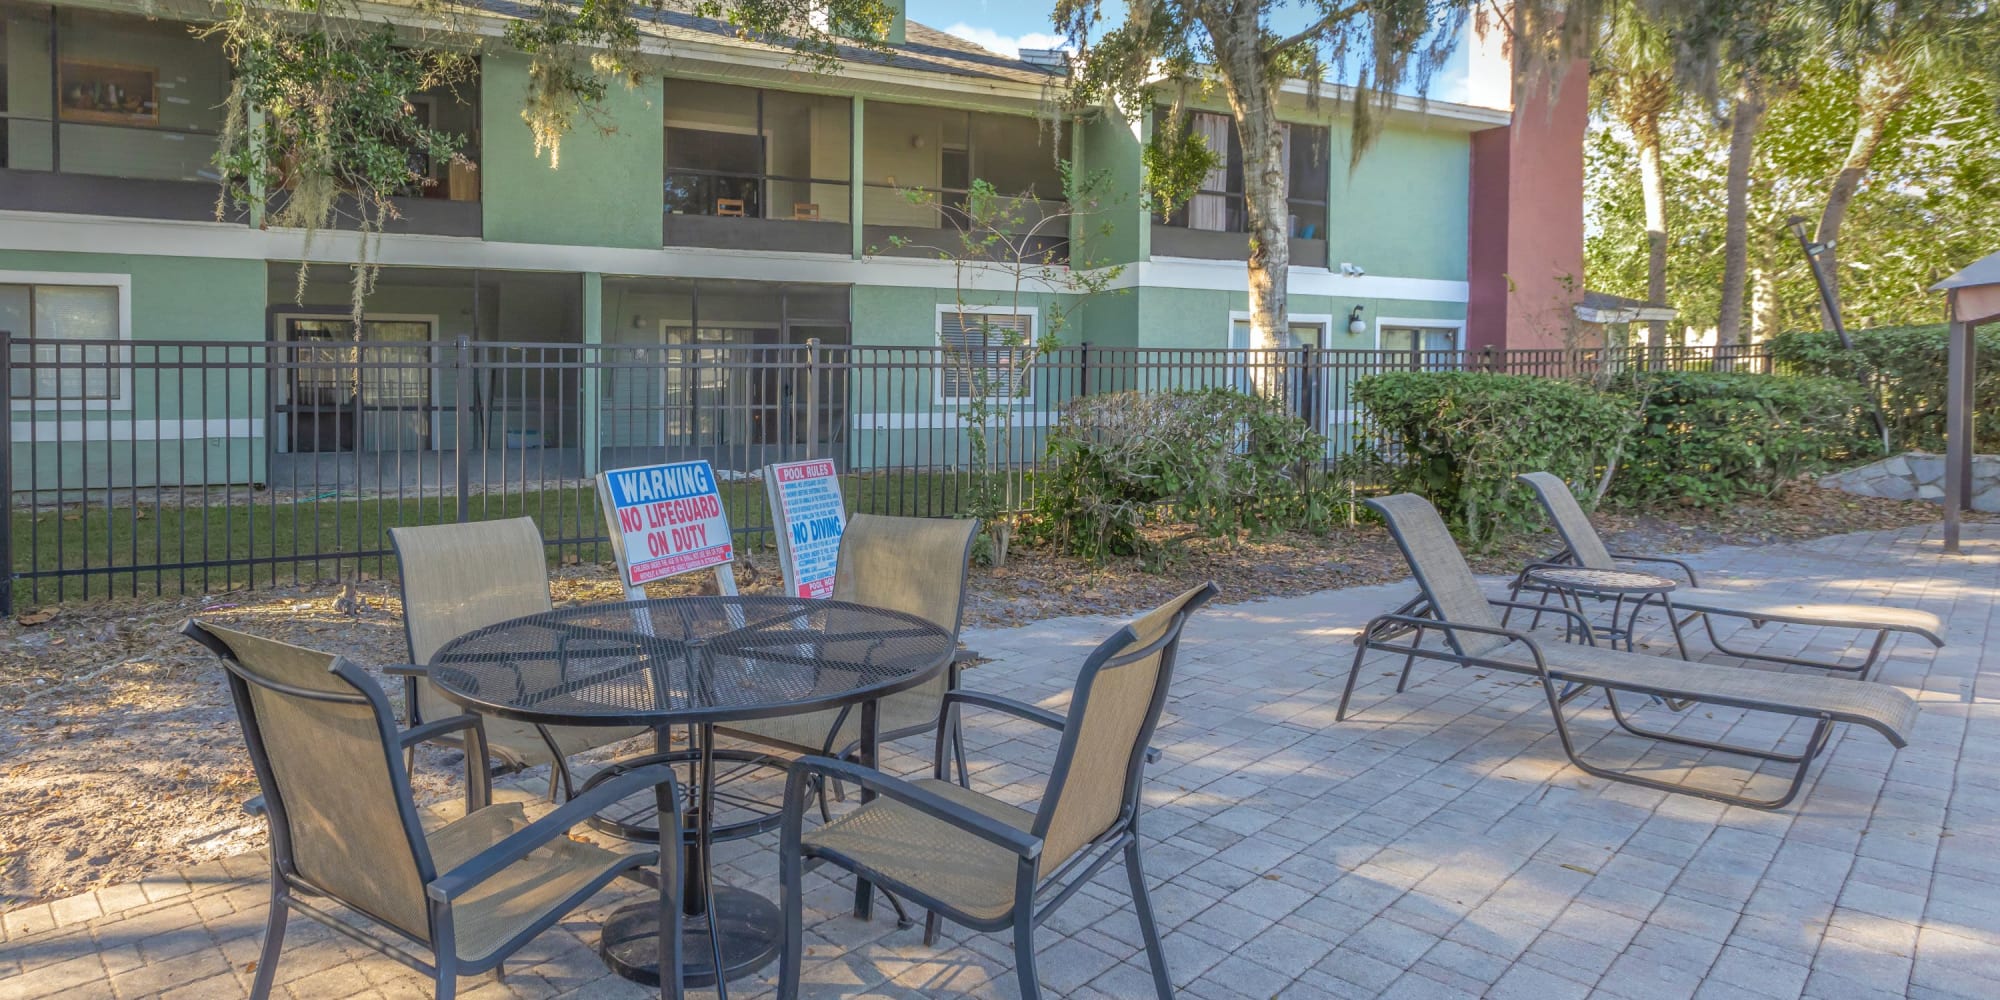 Picnic tables and chairs by the pool at Stone Creek at Wekiva in Altamonte Springs, Florida